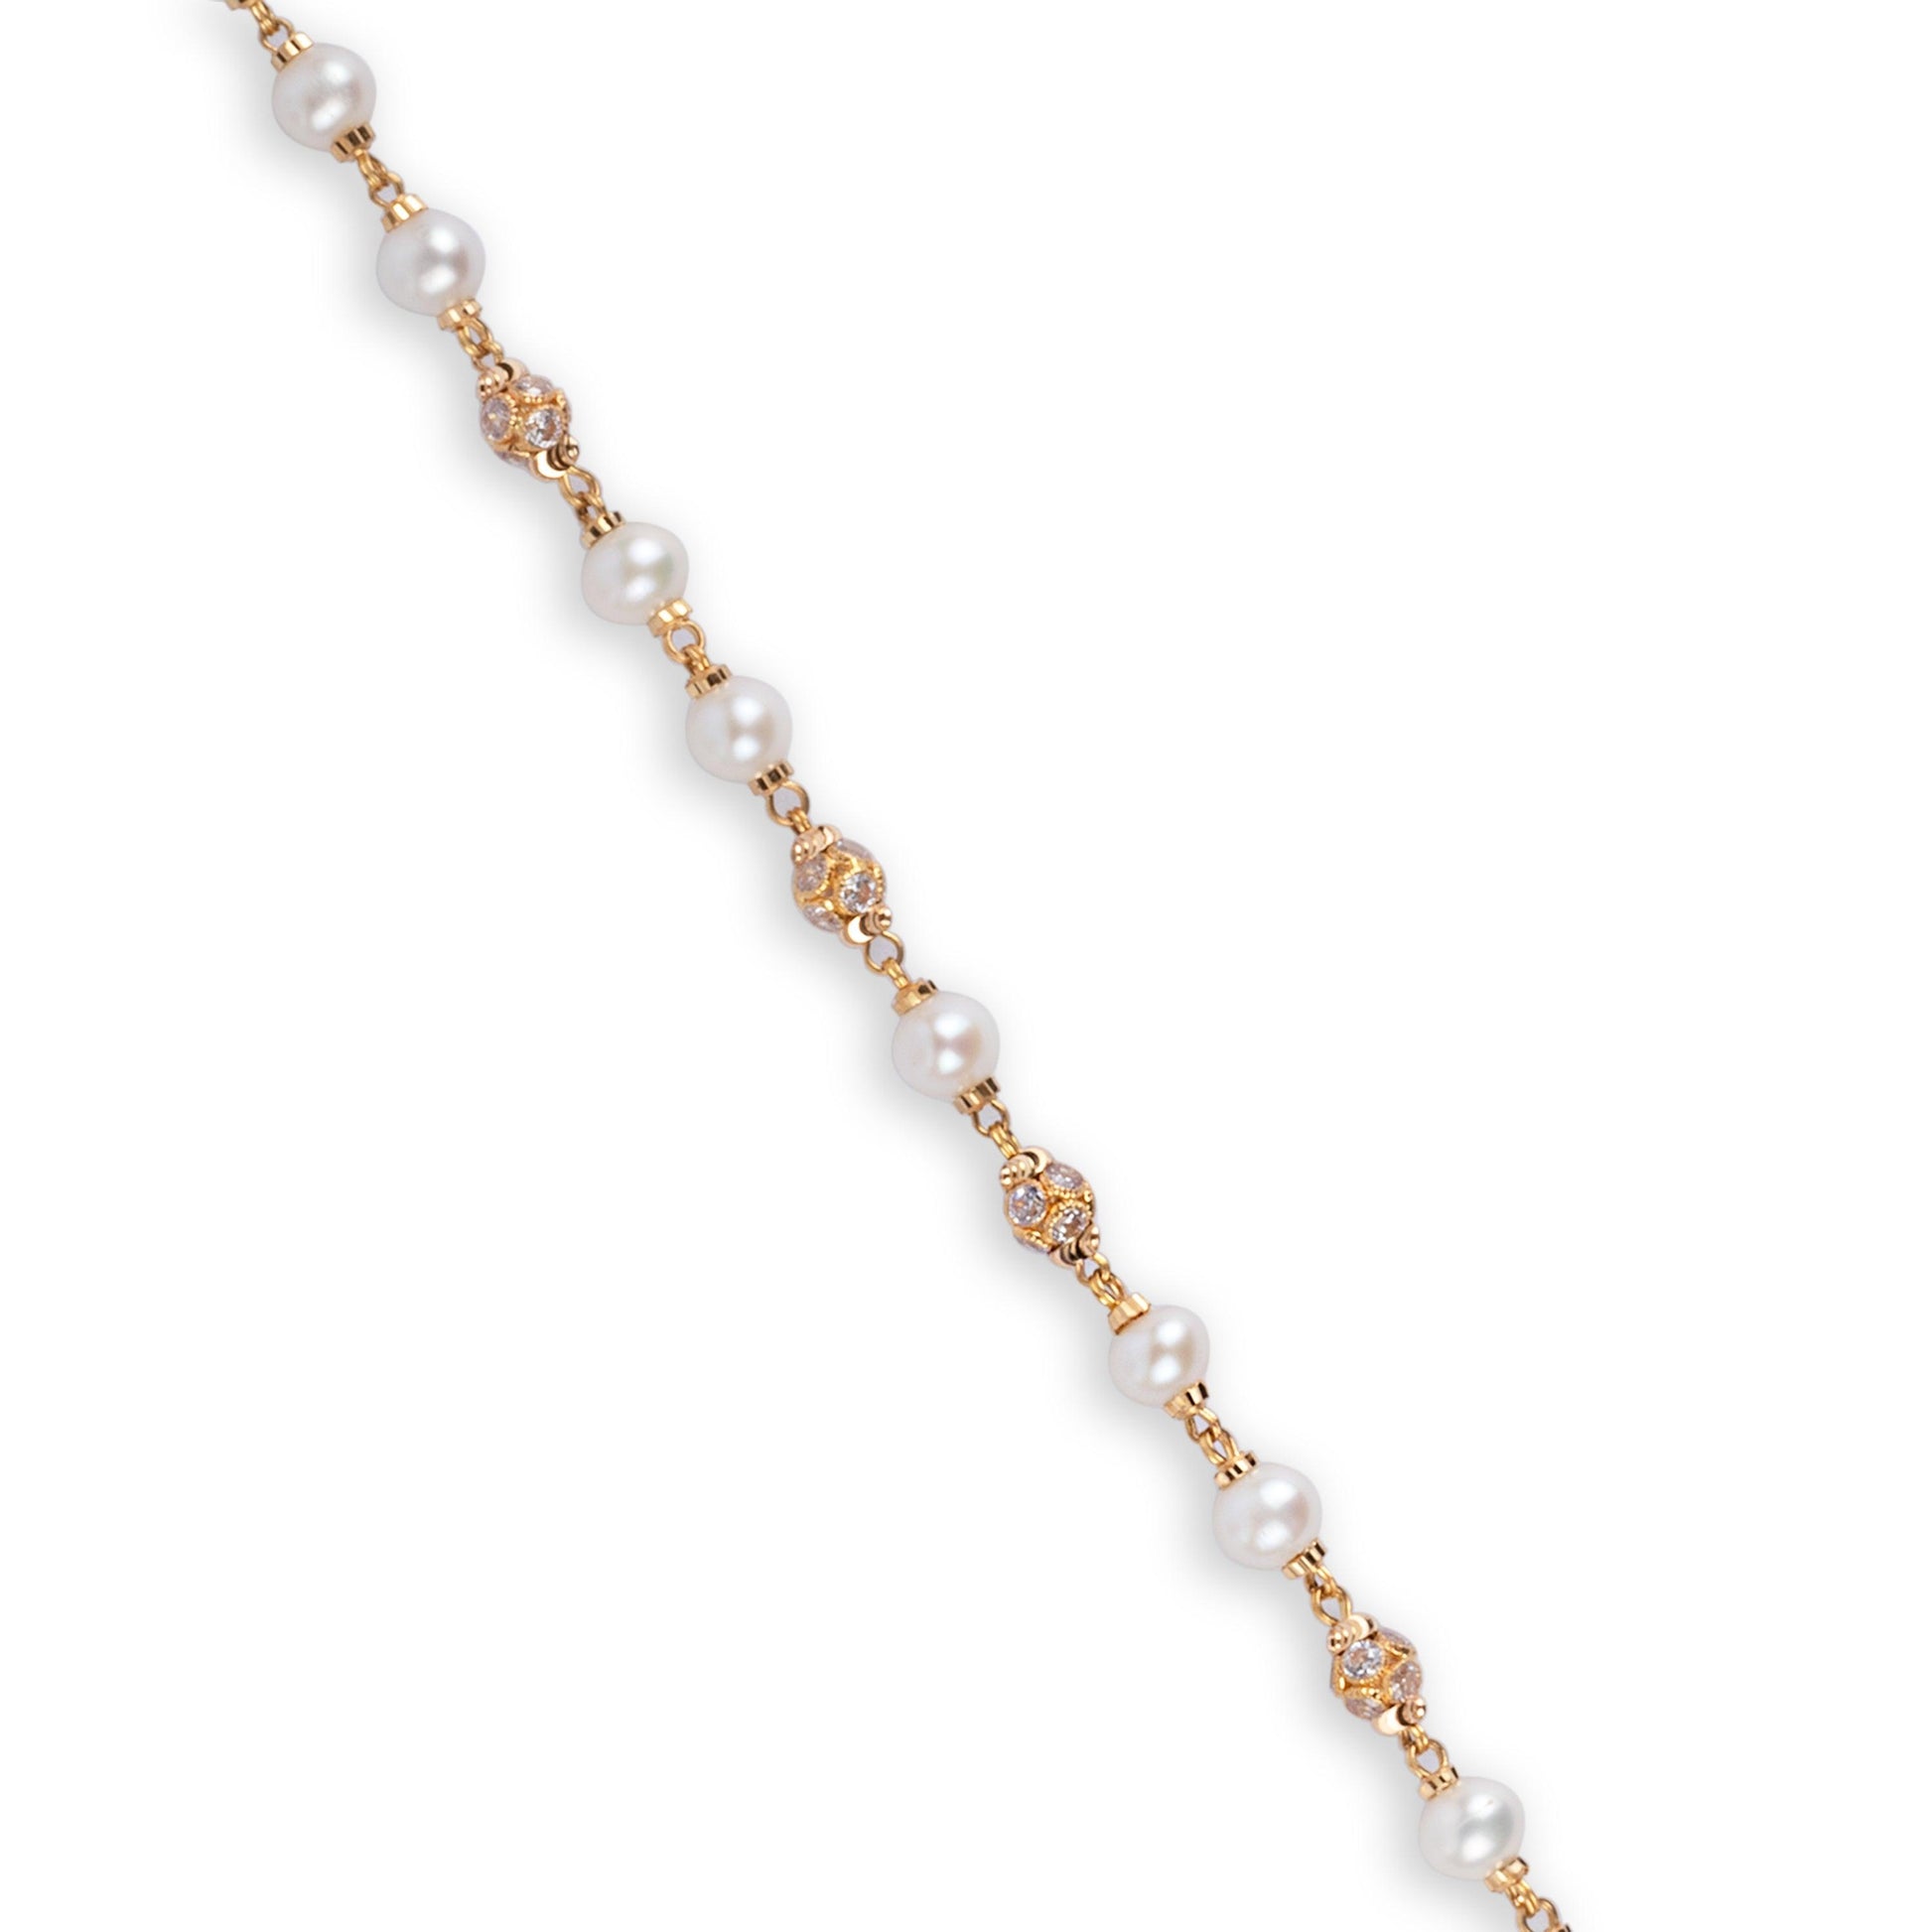 22ct Gold Adjustable Bracelet with Cultured Pearls & Cubic Zirconia Beads with Lobster Clasp (6.2g) LBR-7135 - Minar Jewellers